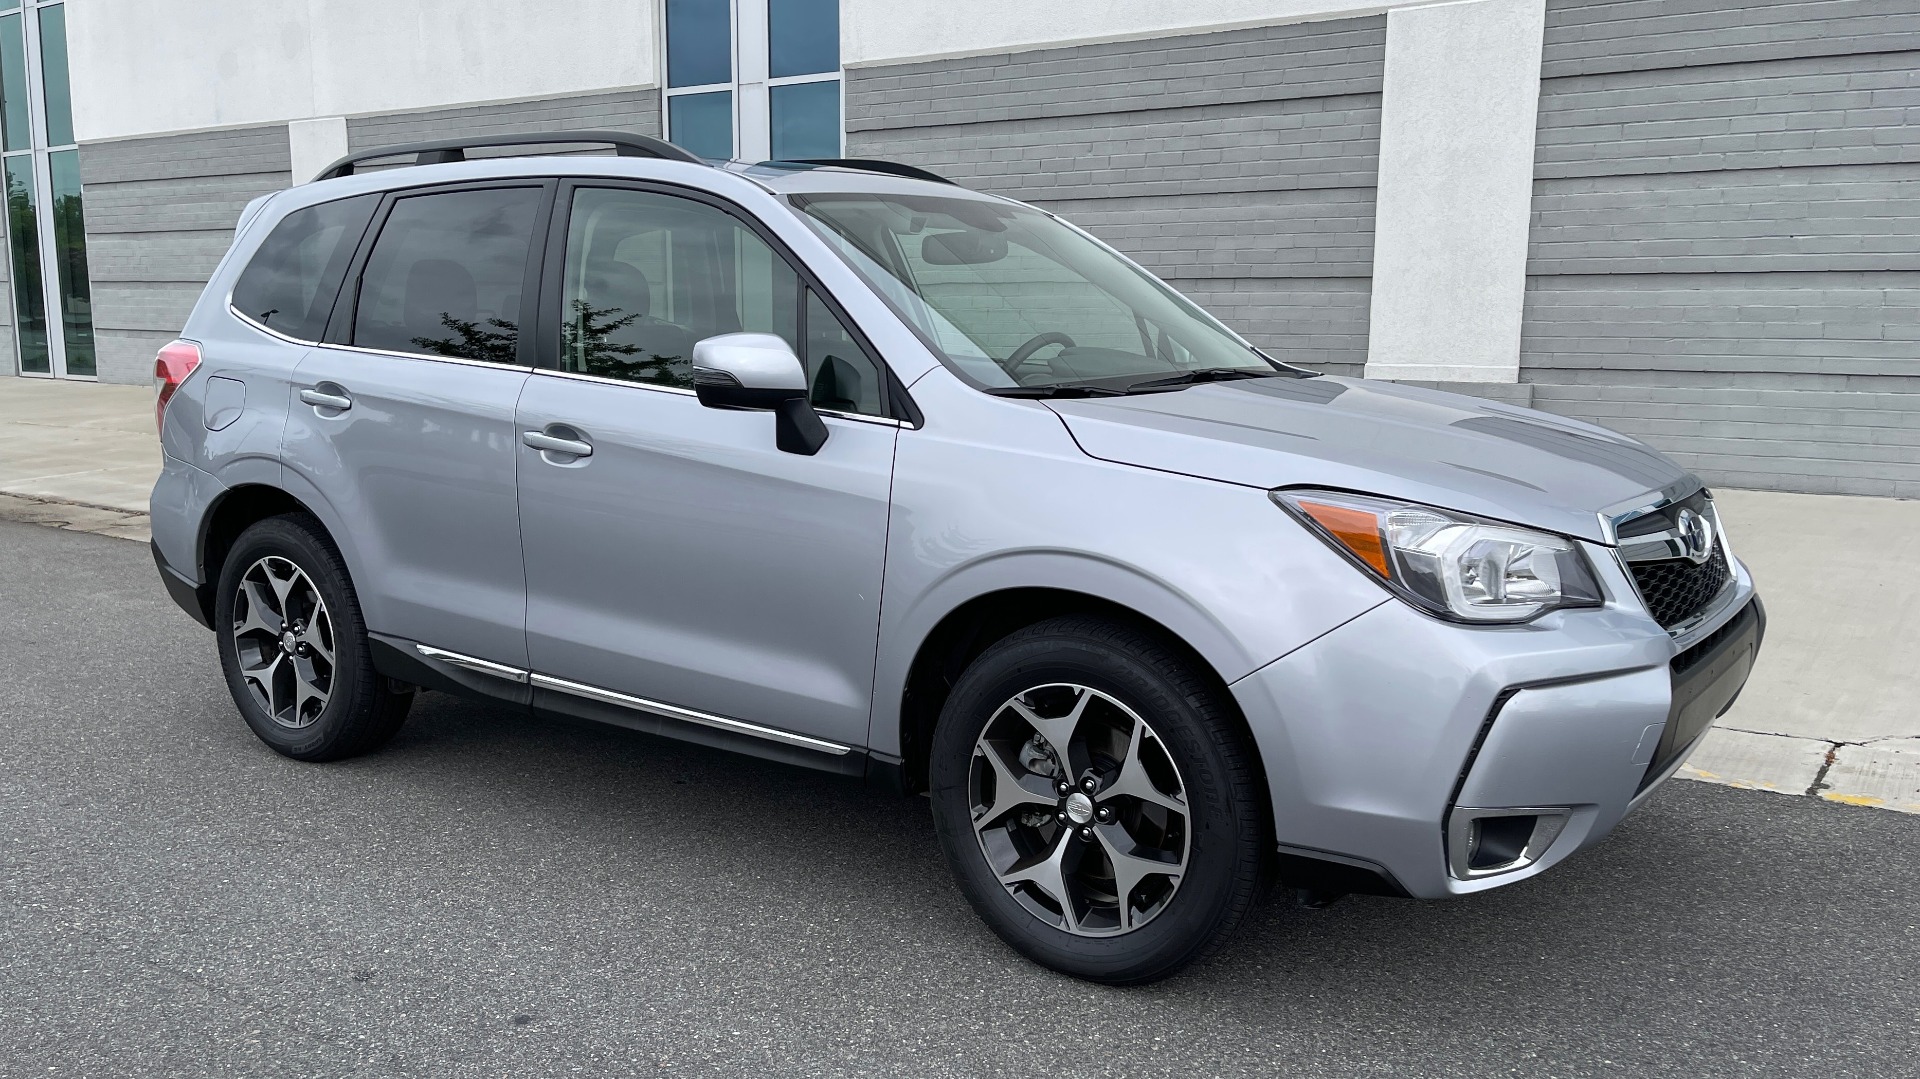 Used 2016 Subaru FORESTER 2.0XT TOURING / NAV / SUNROOF / ADAPT CRS / PRE-COLLISION / REARVIEW for sale Sold at Formula Imports in Charlotte NC 28227 6